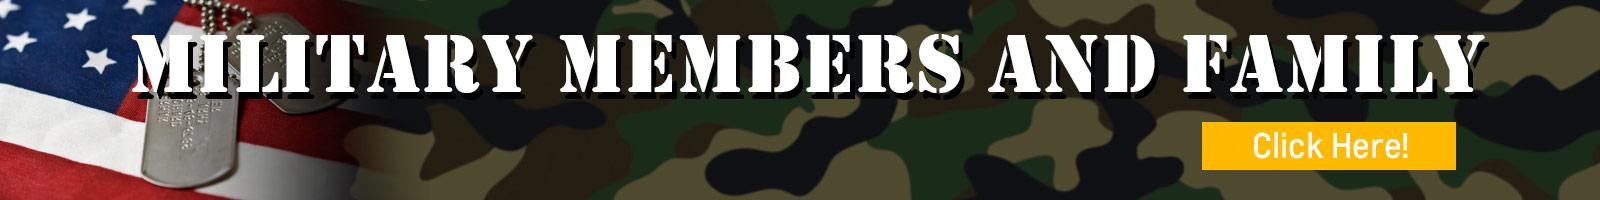 Military Banner